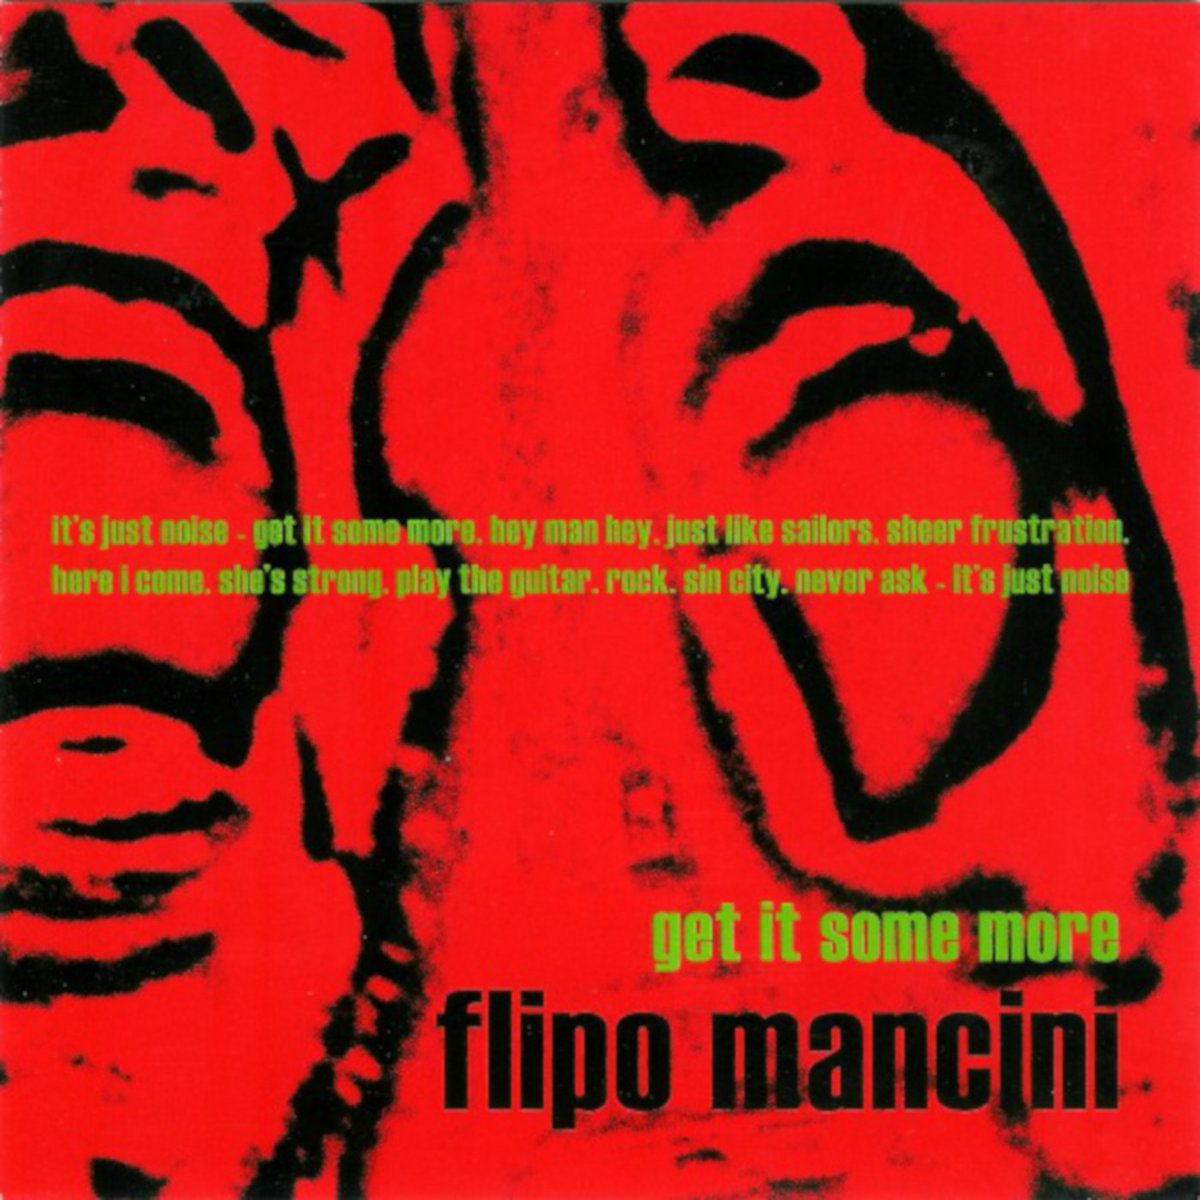 Flipo Mancini - Get It Some More front cover